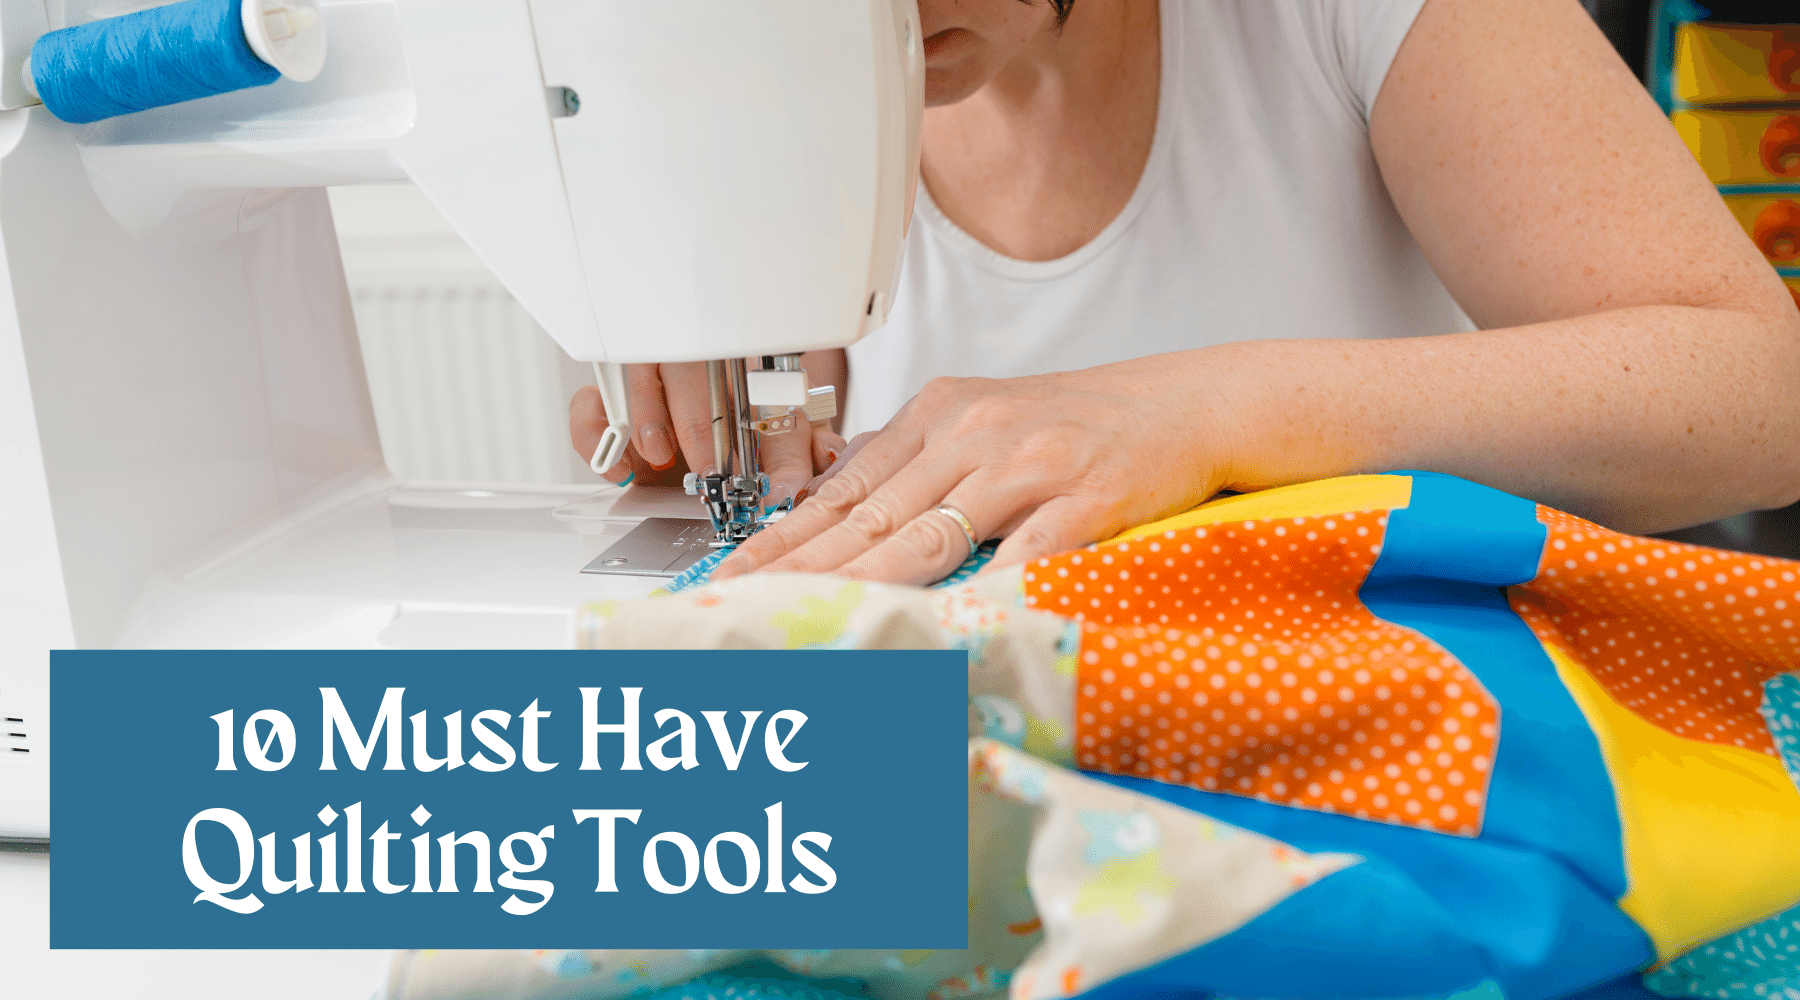 10 Must Have Quilting Tools - if you love to quilt or sew, then you will love these tools.  You'll unearth cool quilting rulers, scissors, wonder clips, die cutting machines, the best thread and more!